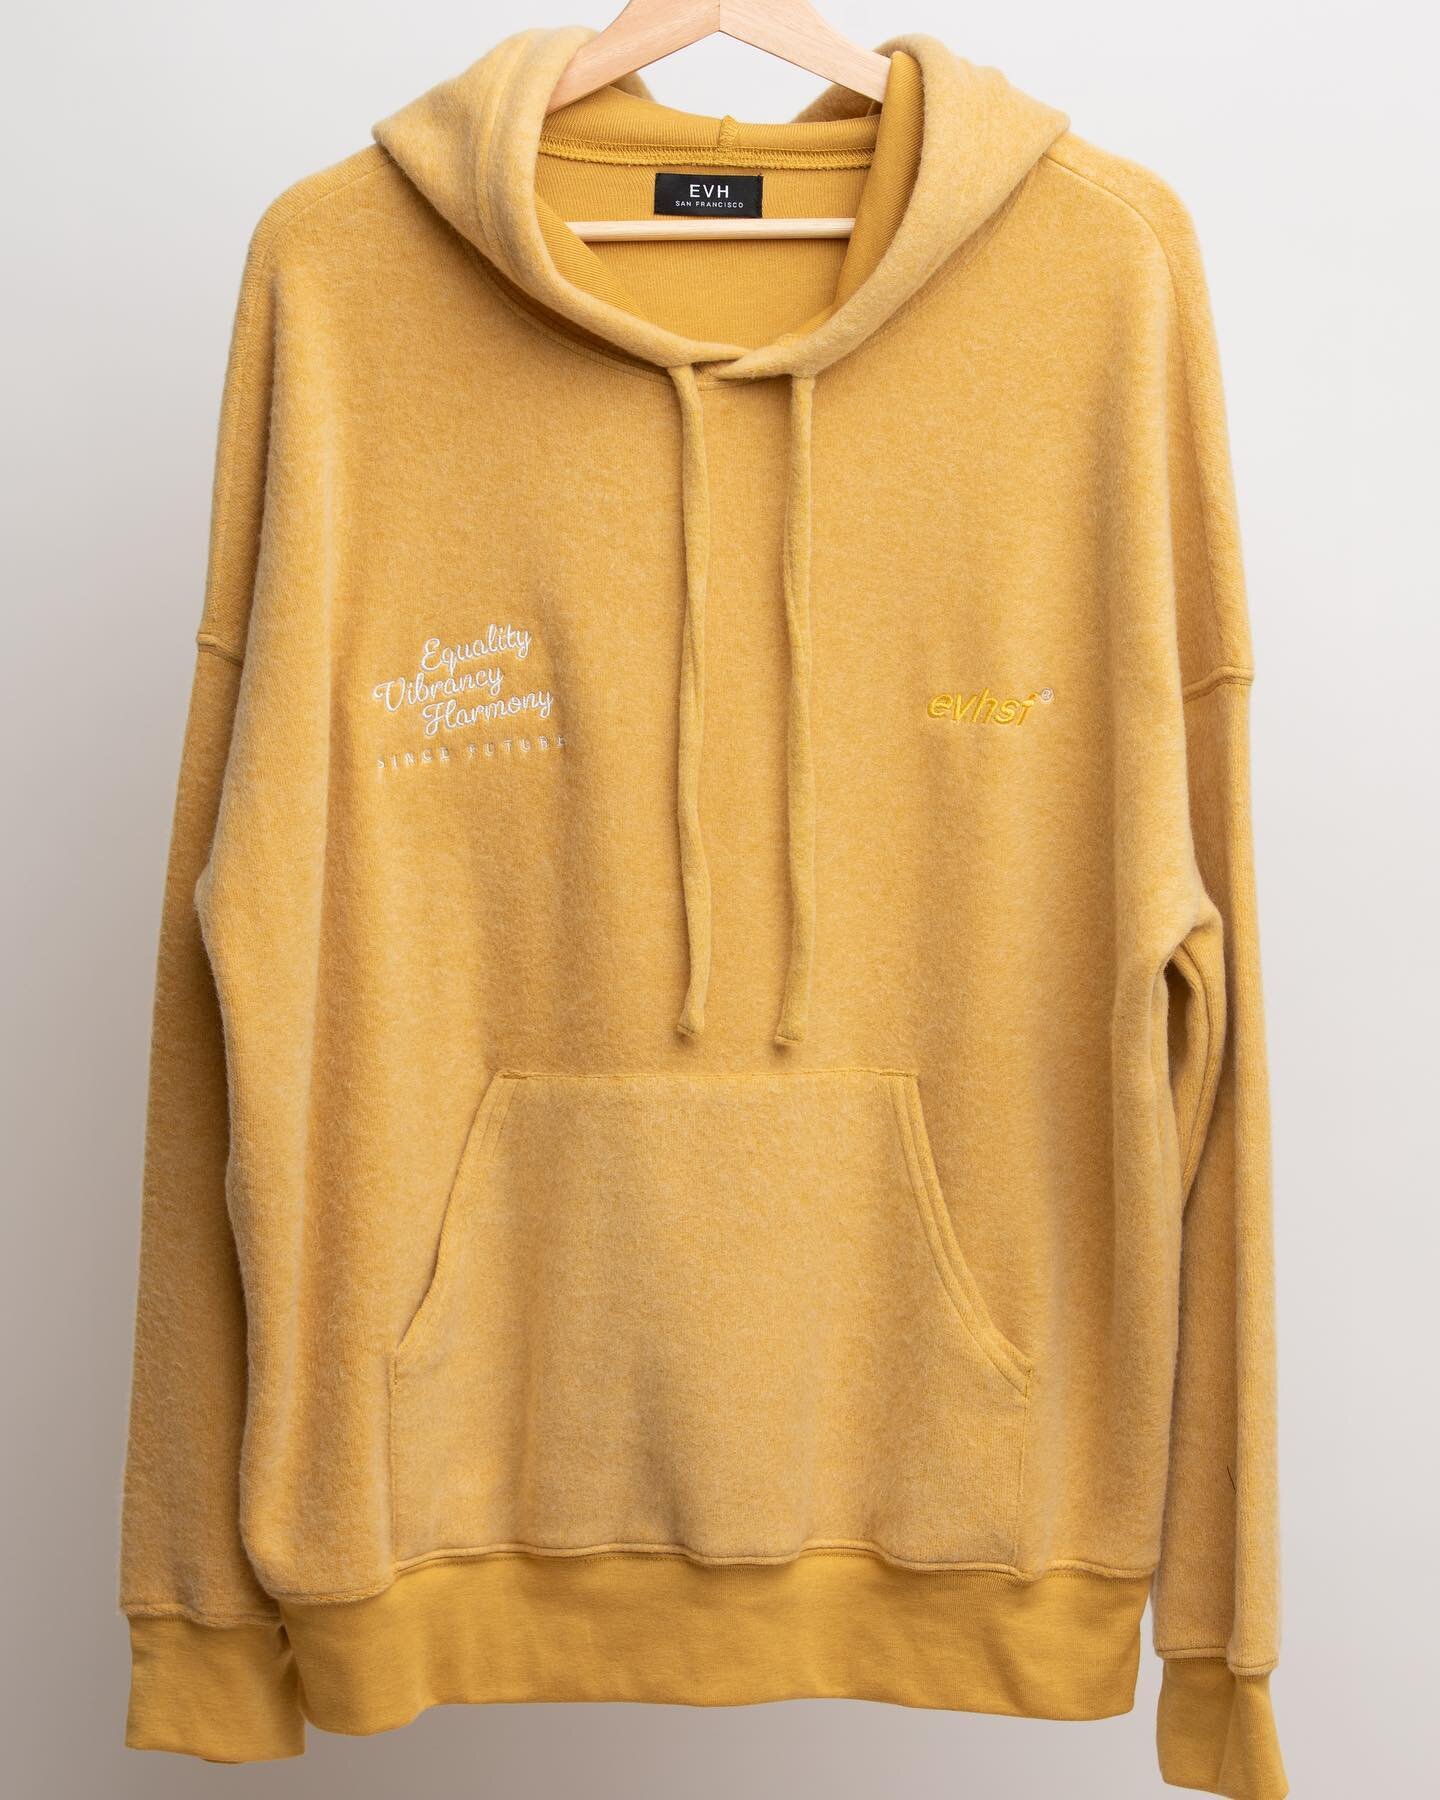 Introducing the Sueded Hoodie&hellip; A collaboration of design love and comfort 💛💐 avail April 10